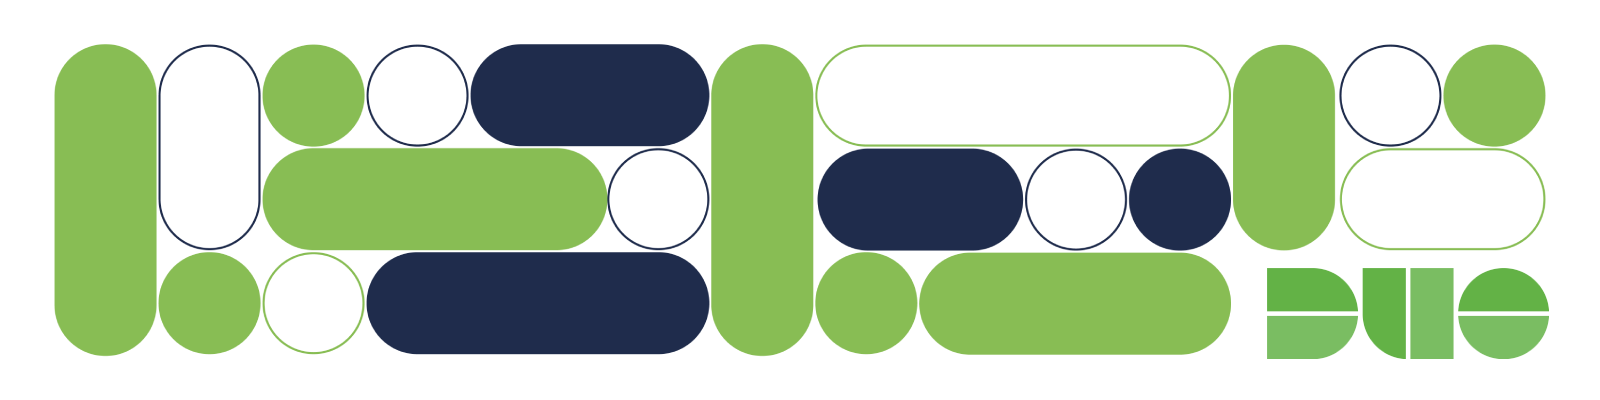 Duo logo with shapes